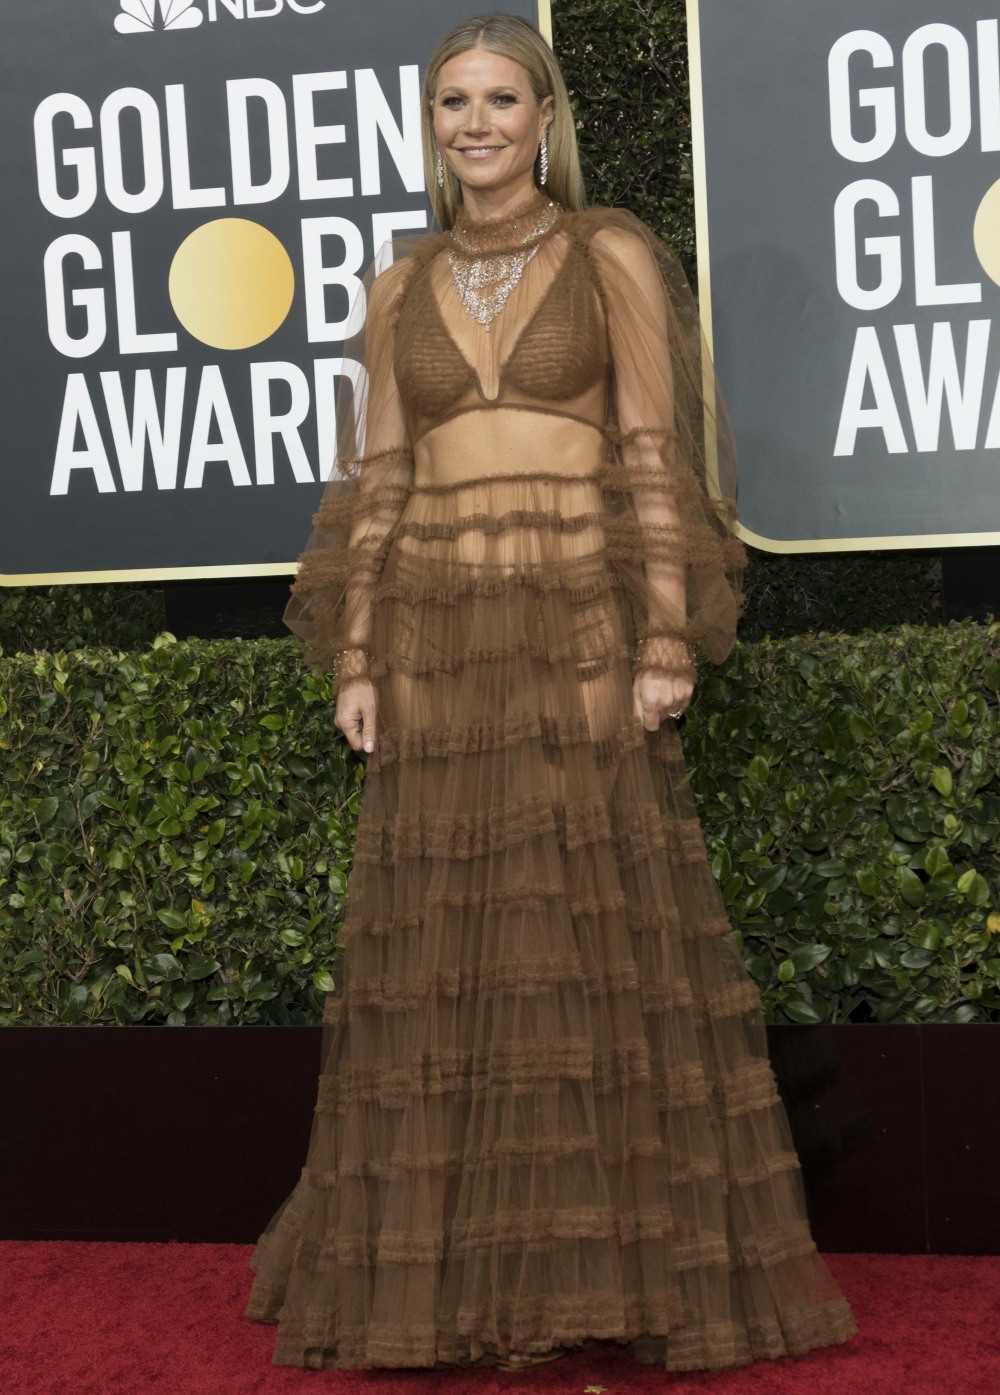 Gwyneth Paltrow attends the 77th Annual Golden Globe Awards, Golden Globes, at Hotel Beverly Hilton in Beverly Hills, Los Angeles, USA, on 05 January 2020. | usage worldwide